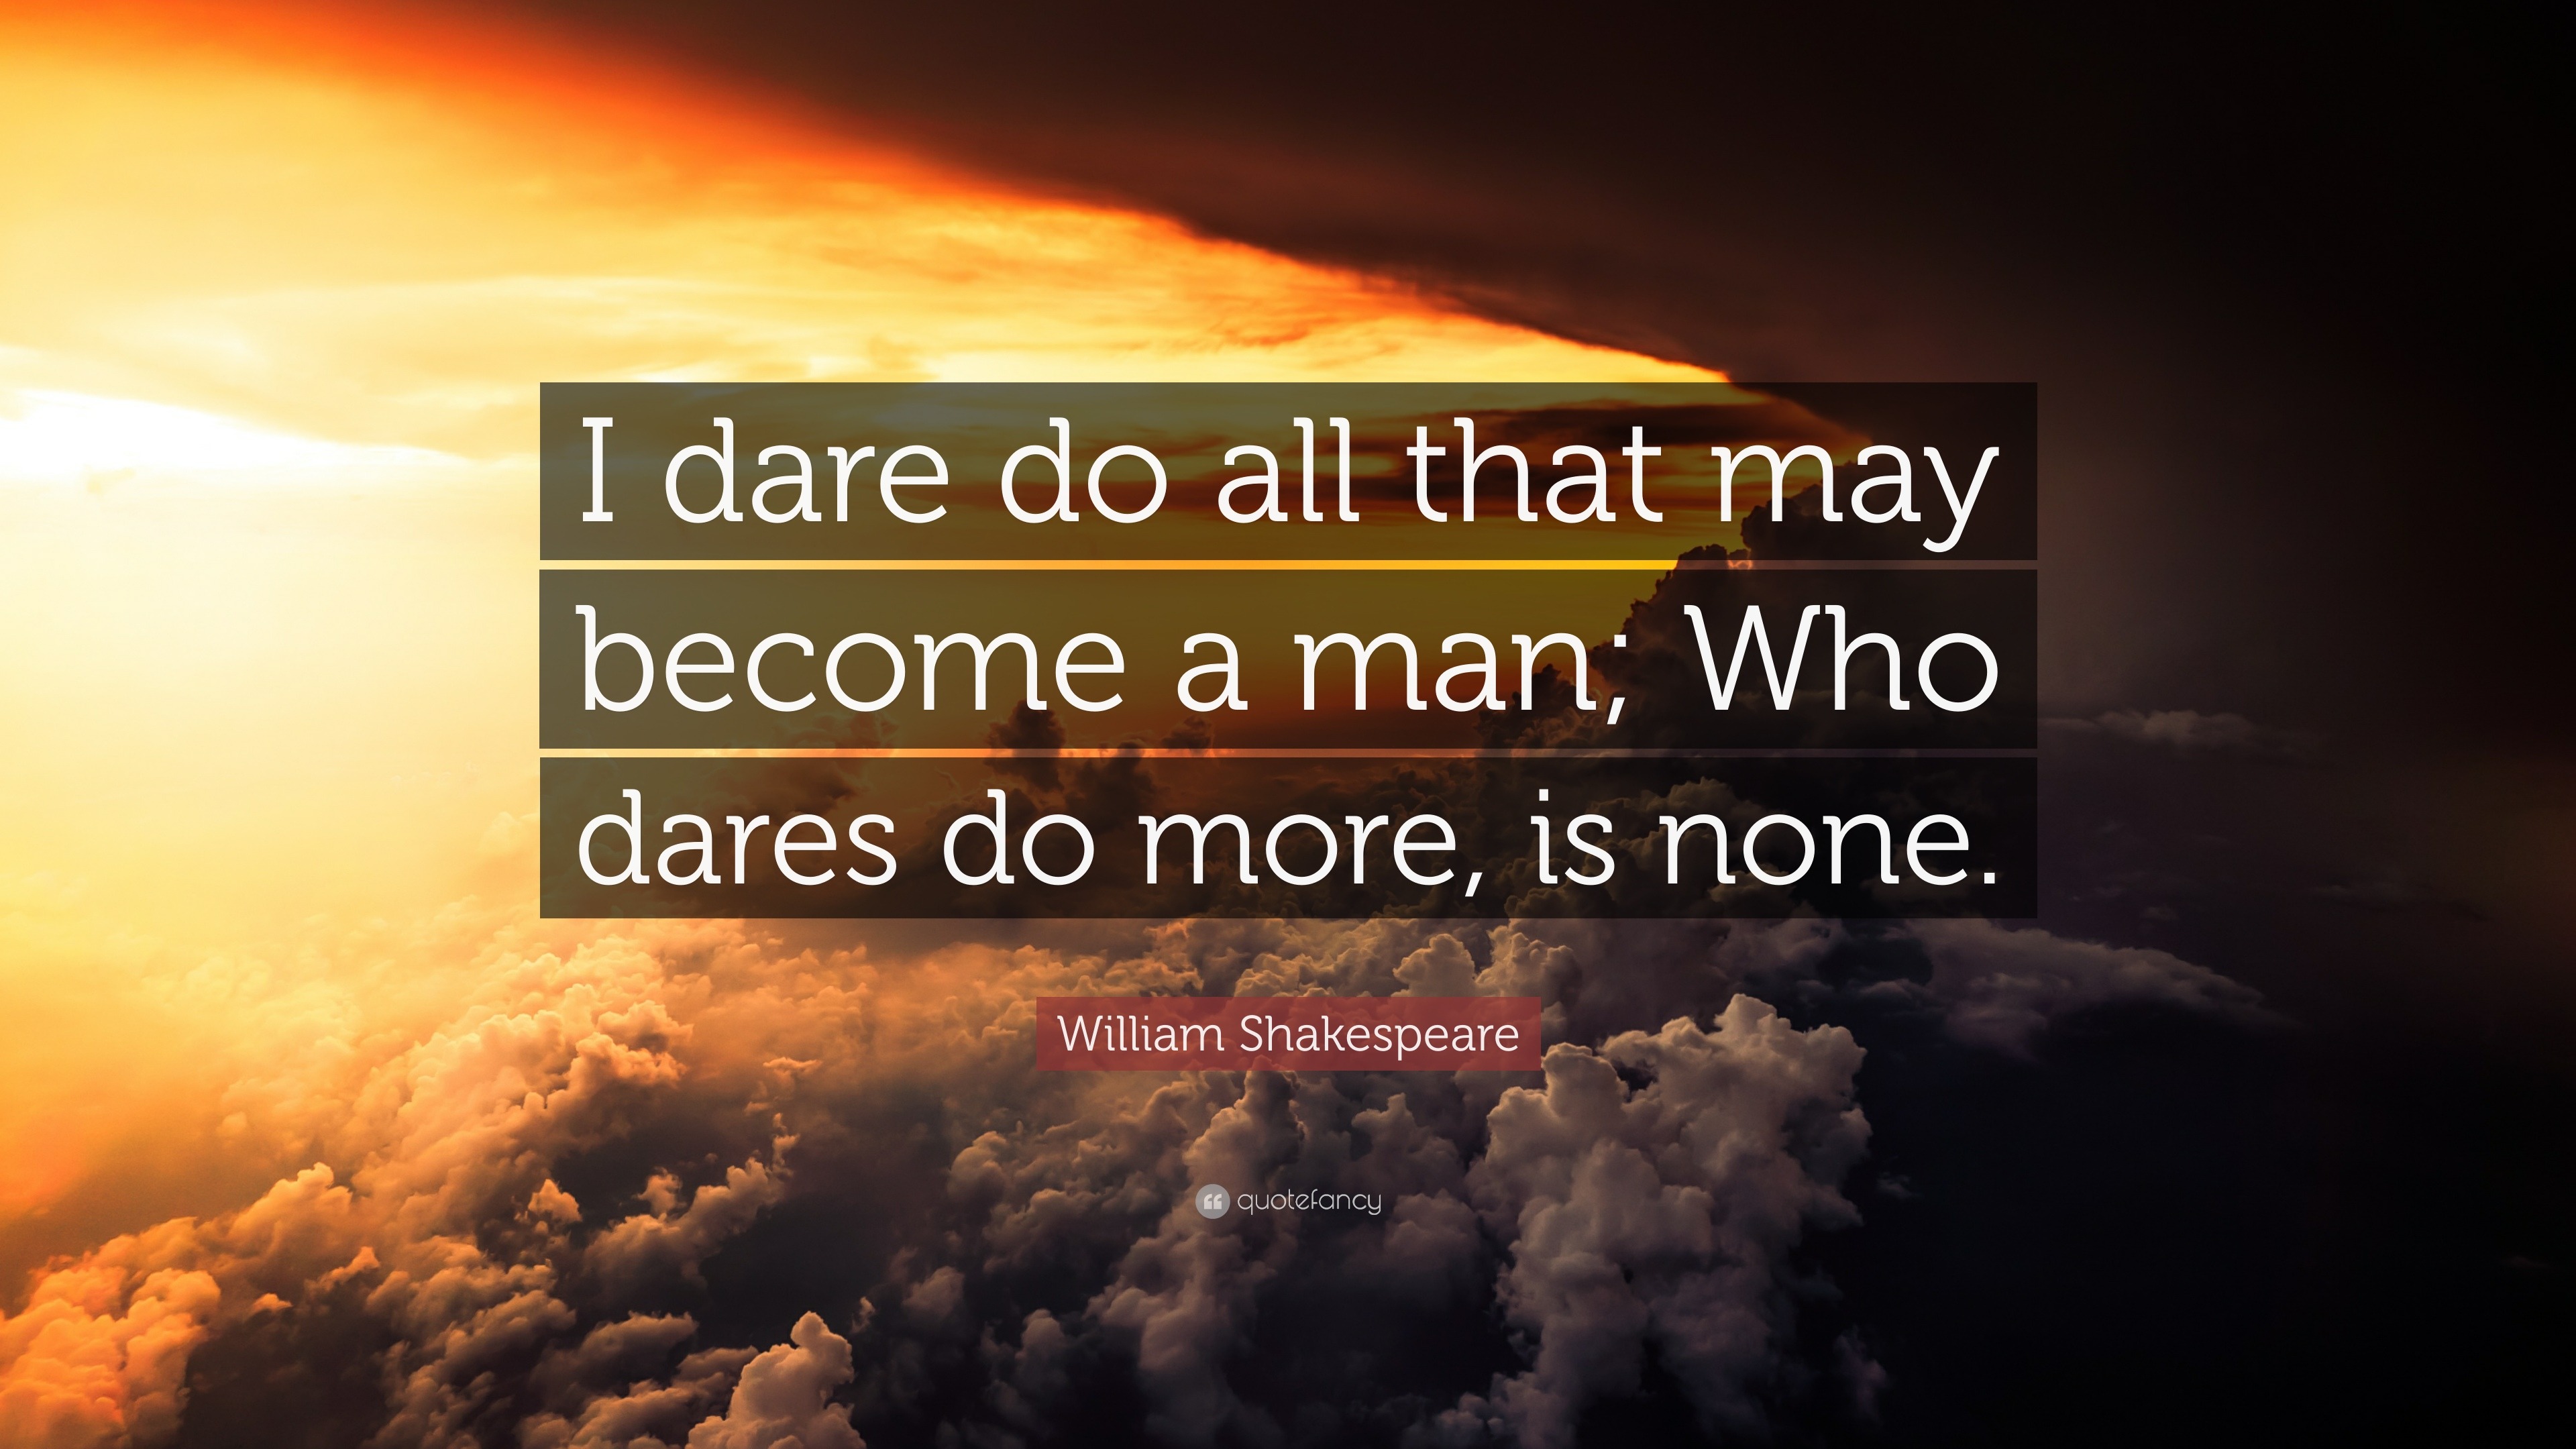 William Shakespeare Quote: “I dare do all that may become a man; Who